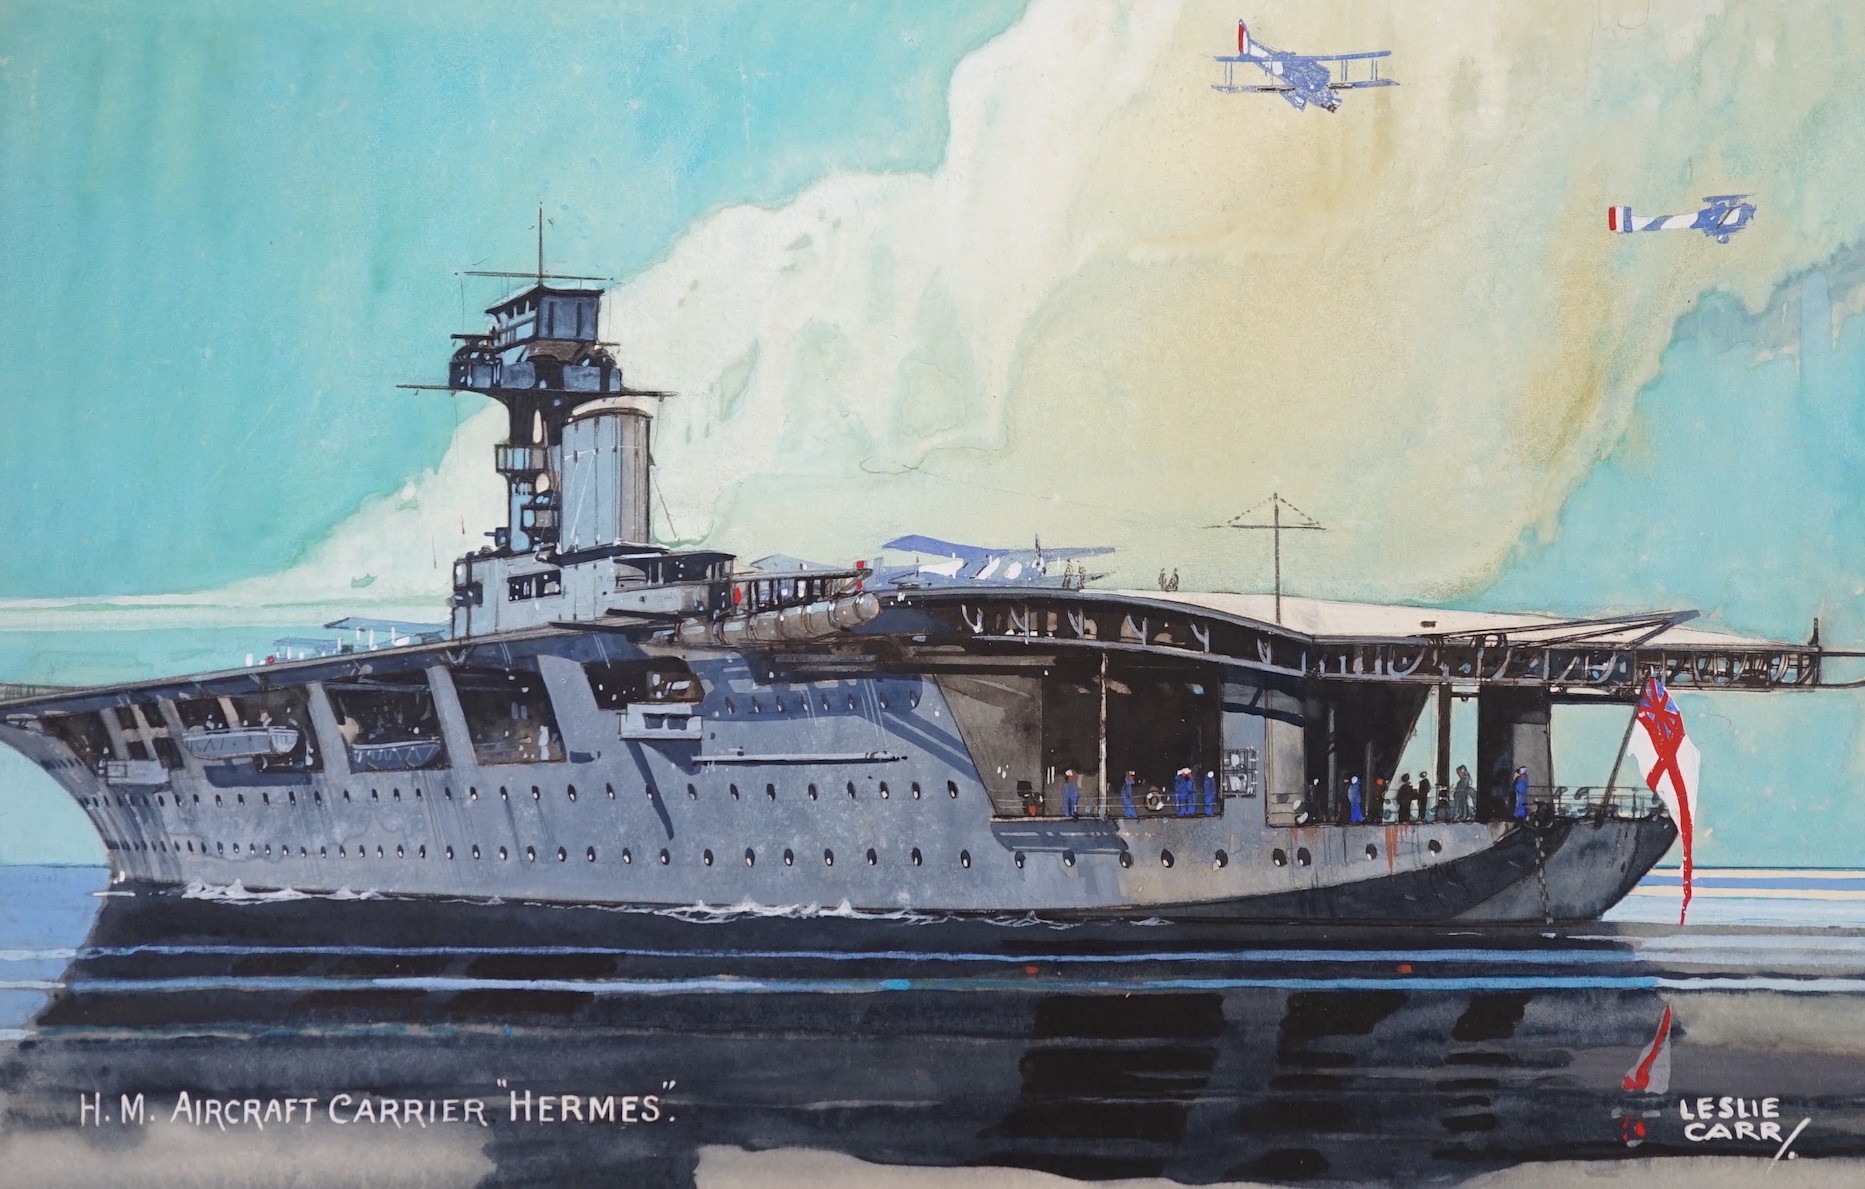 Leslie Carr (1891-1961), two watercolours with gouache, vintage postcard designs of Naval ships 'HMS Hermes' and 'Submarine XI', signed, 22 x 32cm, unframed